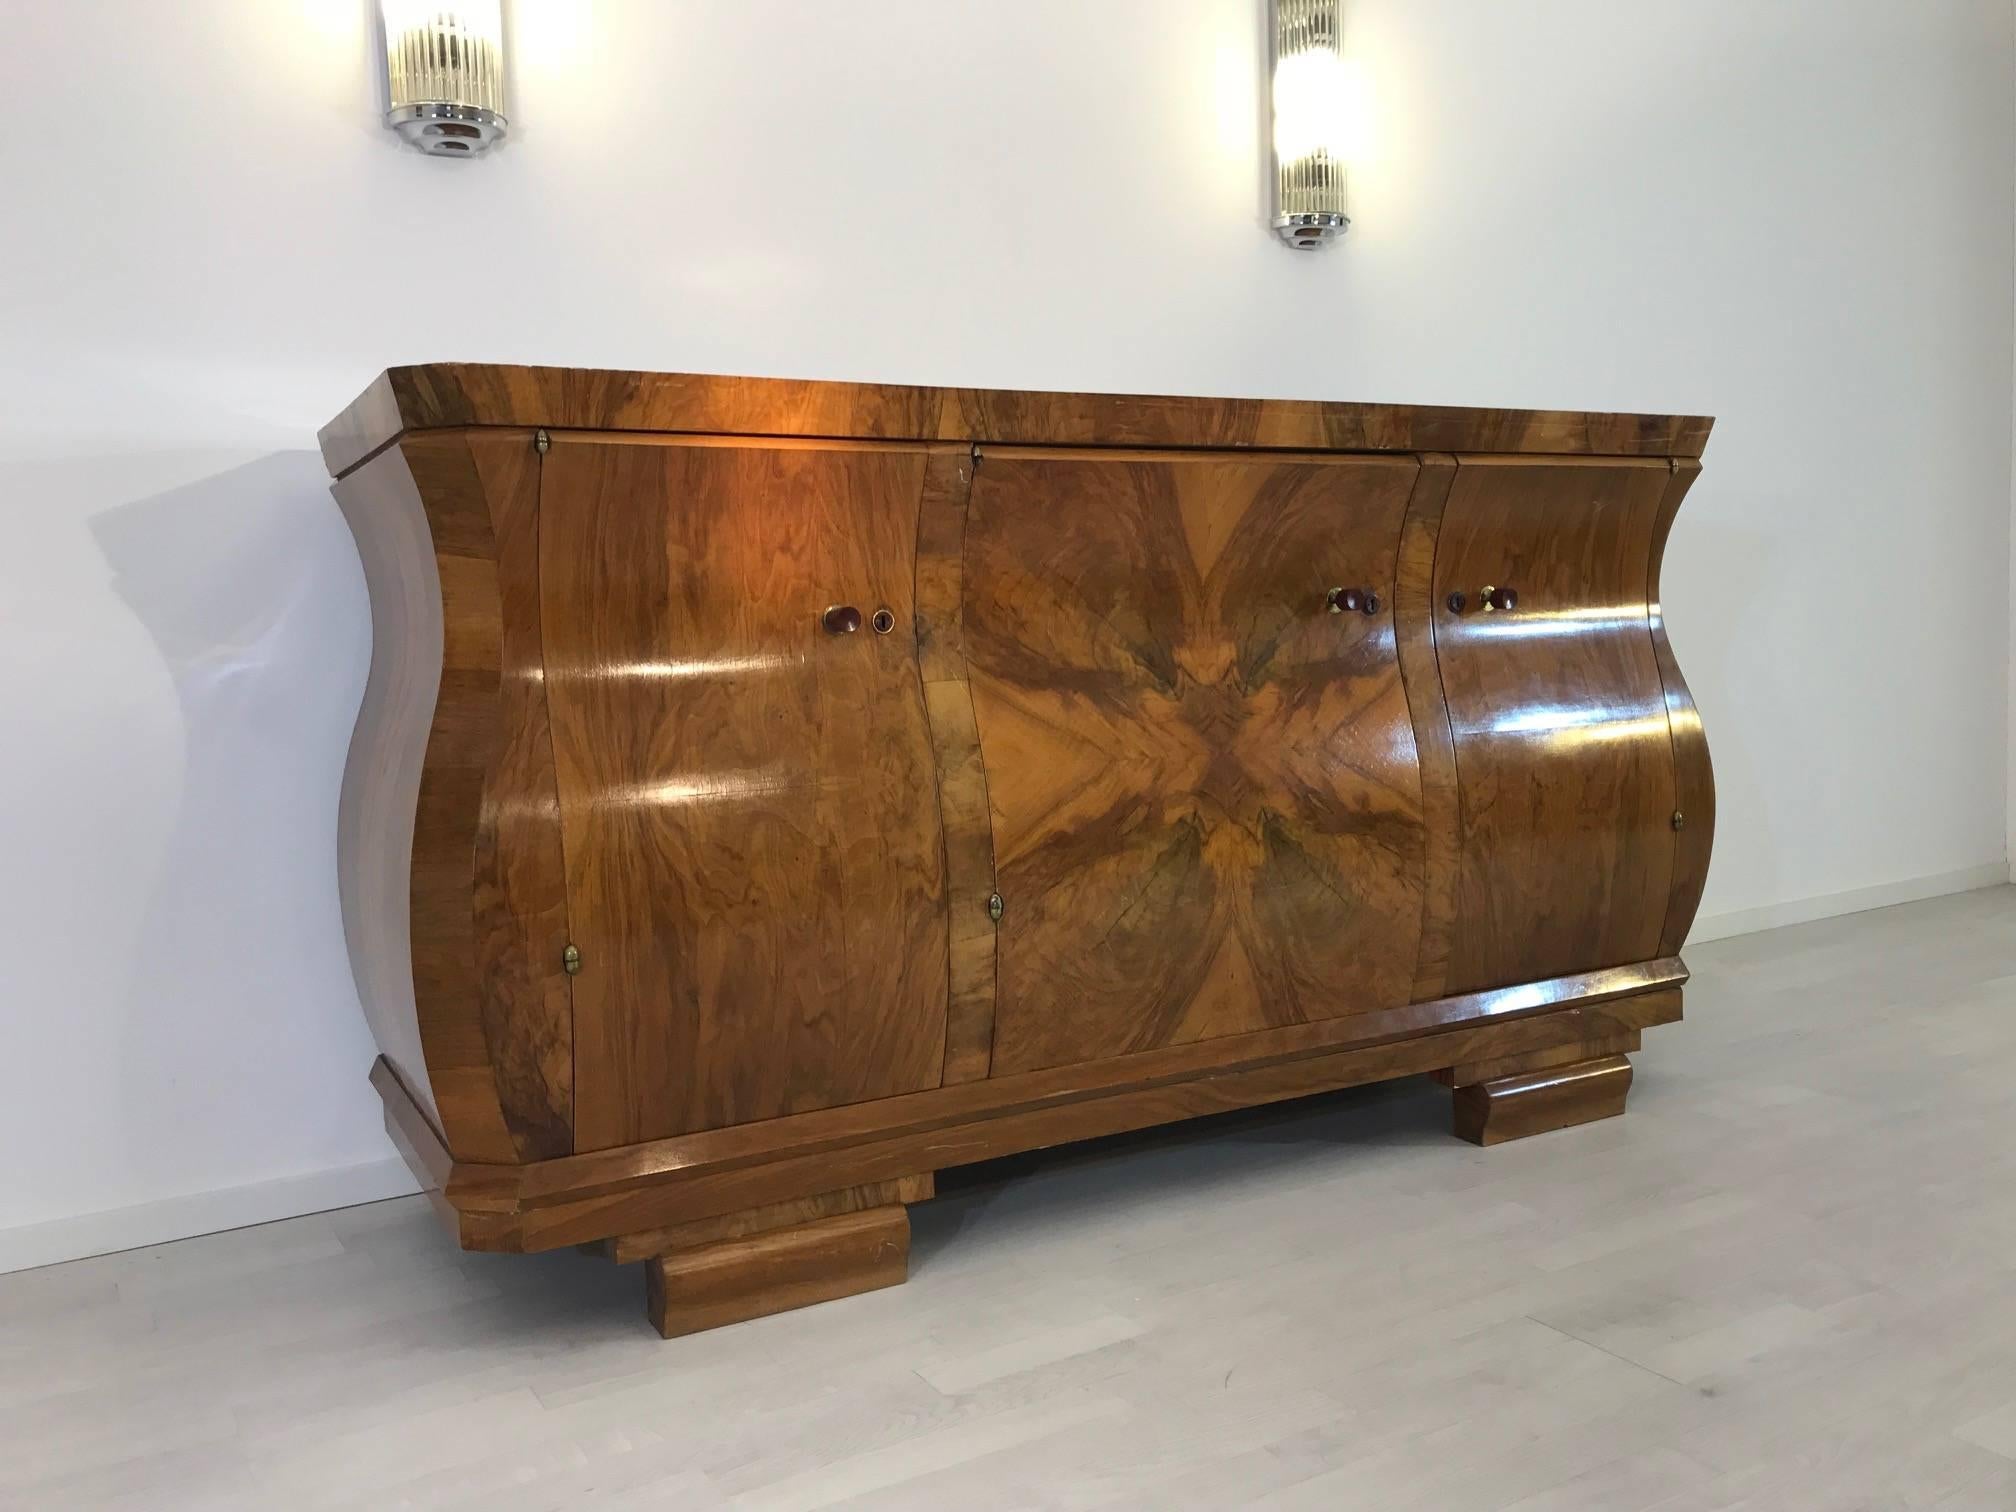 Three doored Art Deco sideboard with an elegant tulip body. This French masterpiece offers a unique combination of walnut wood and Art Deco design. Typical buffet from a stunning furniture period.

 Original piece from France, 1920s
 Clean